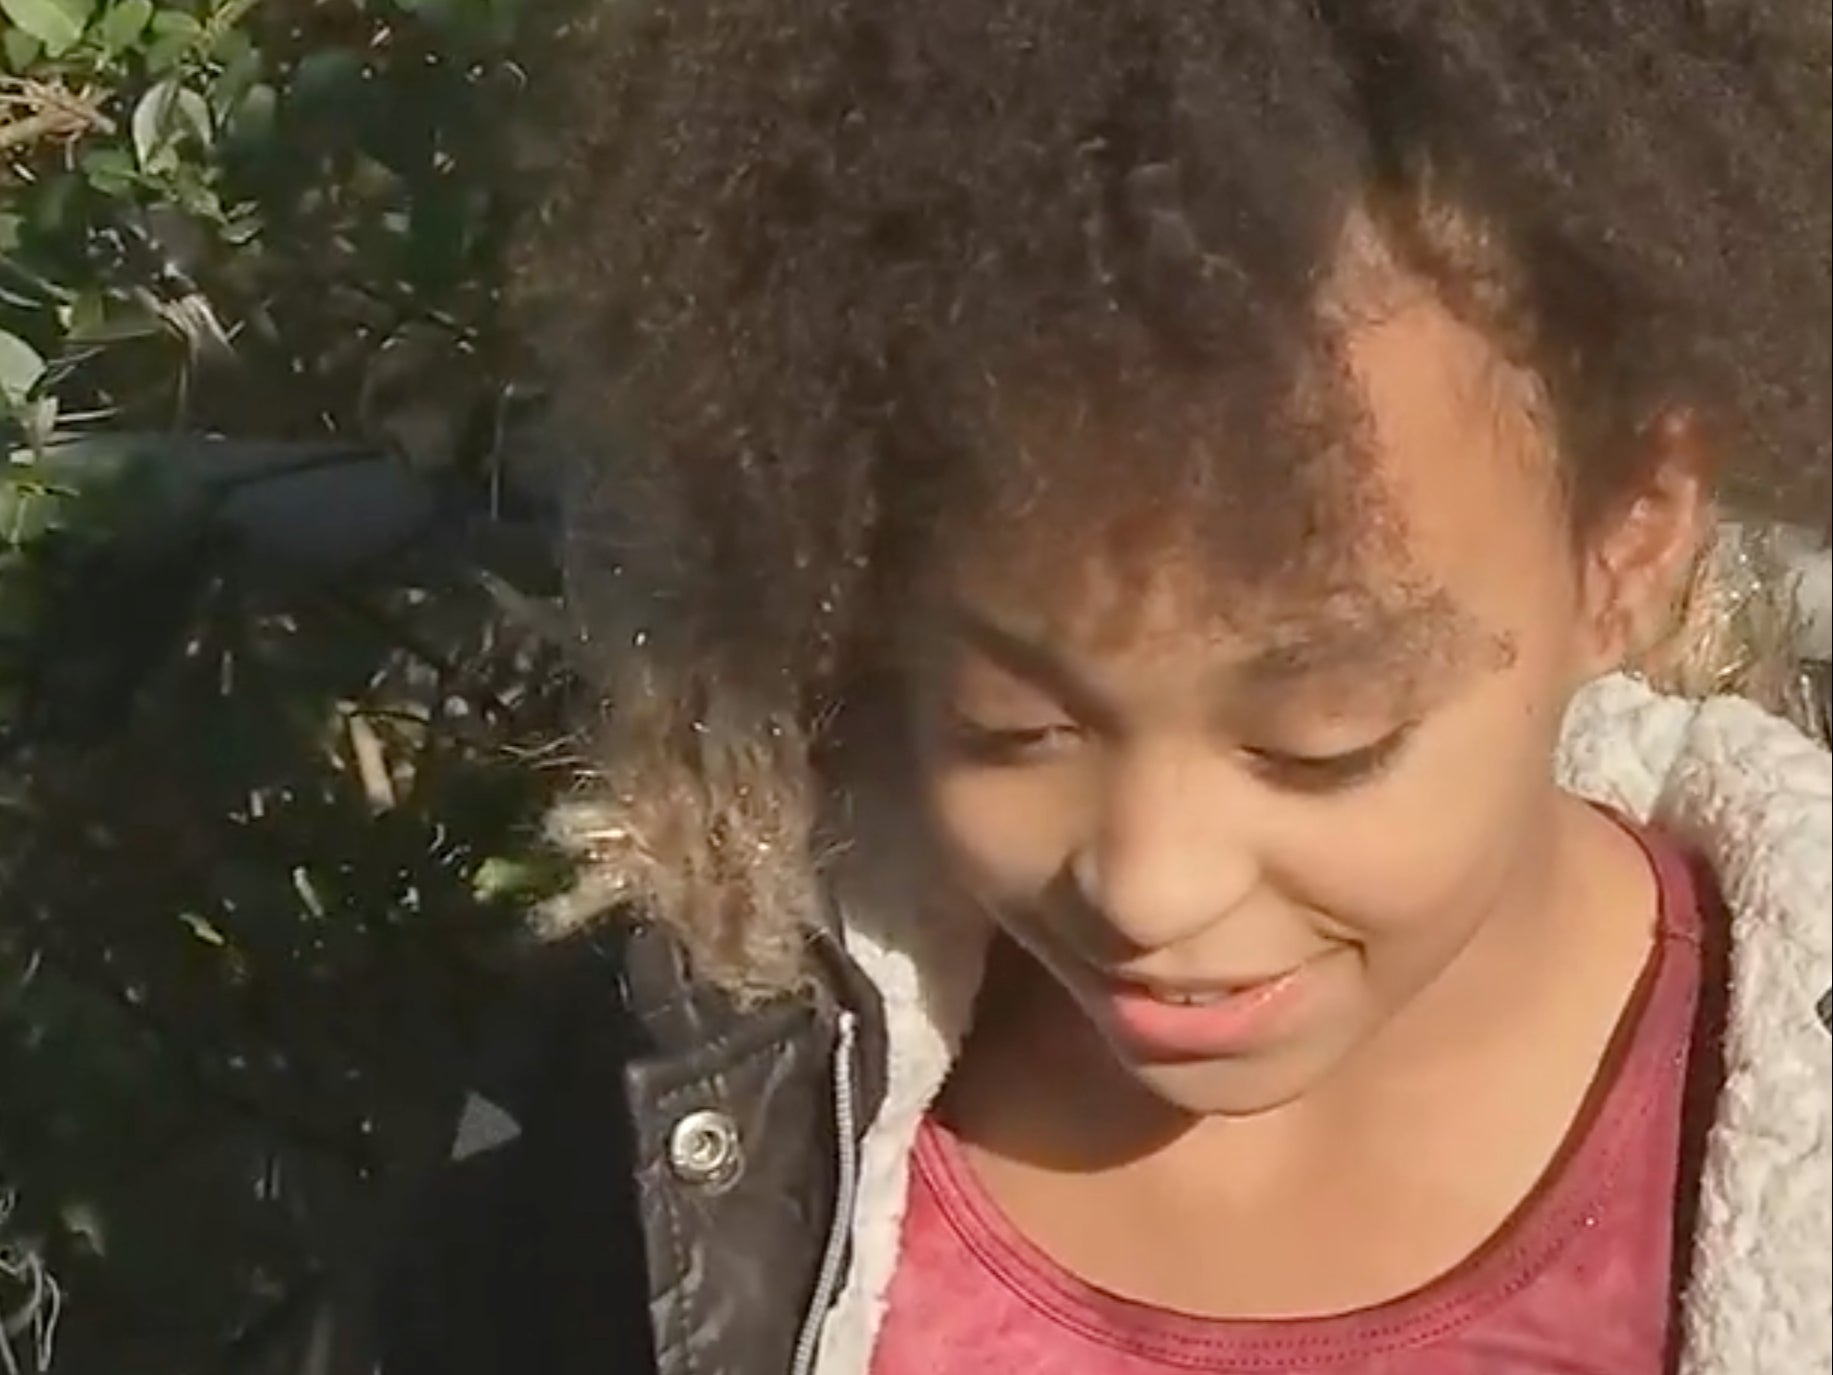 The nine-year-old who saved her family from carbon monoxide poisoning